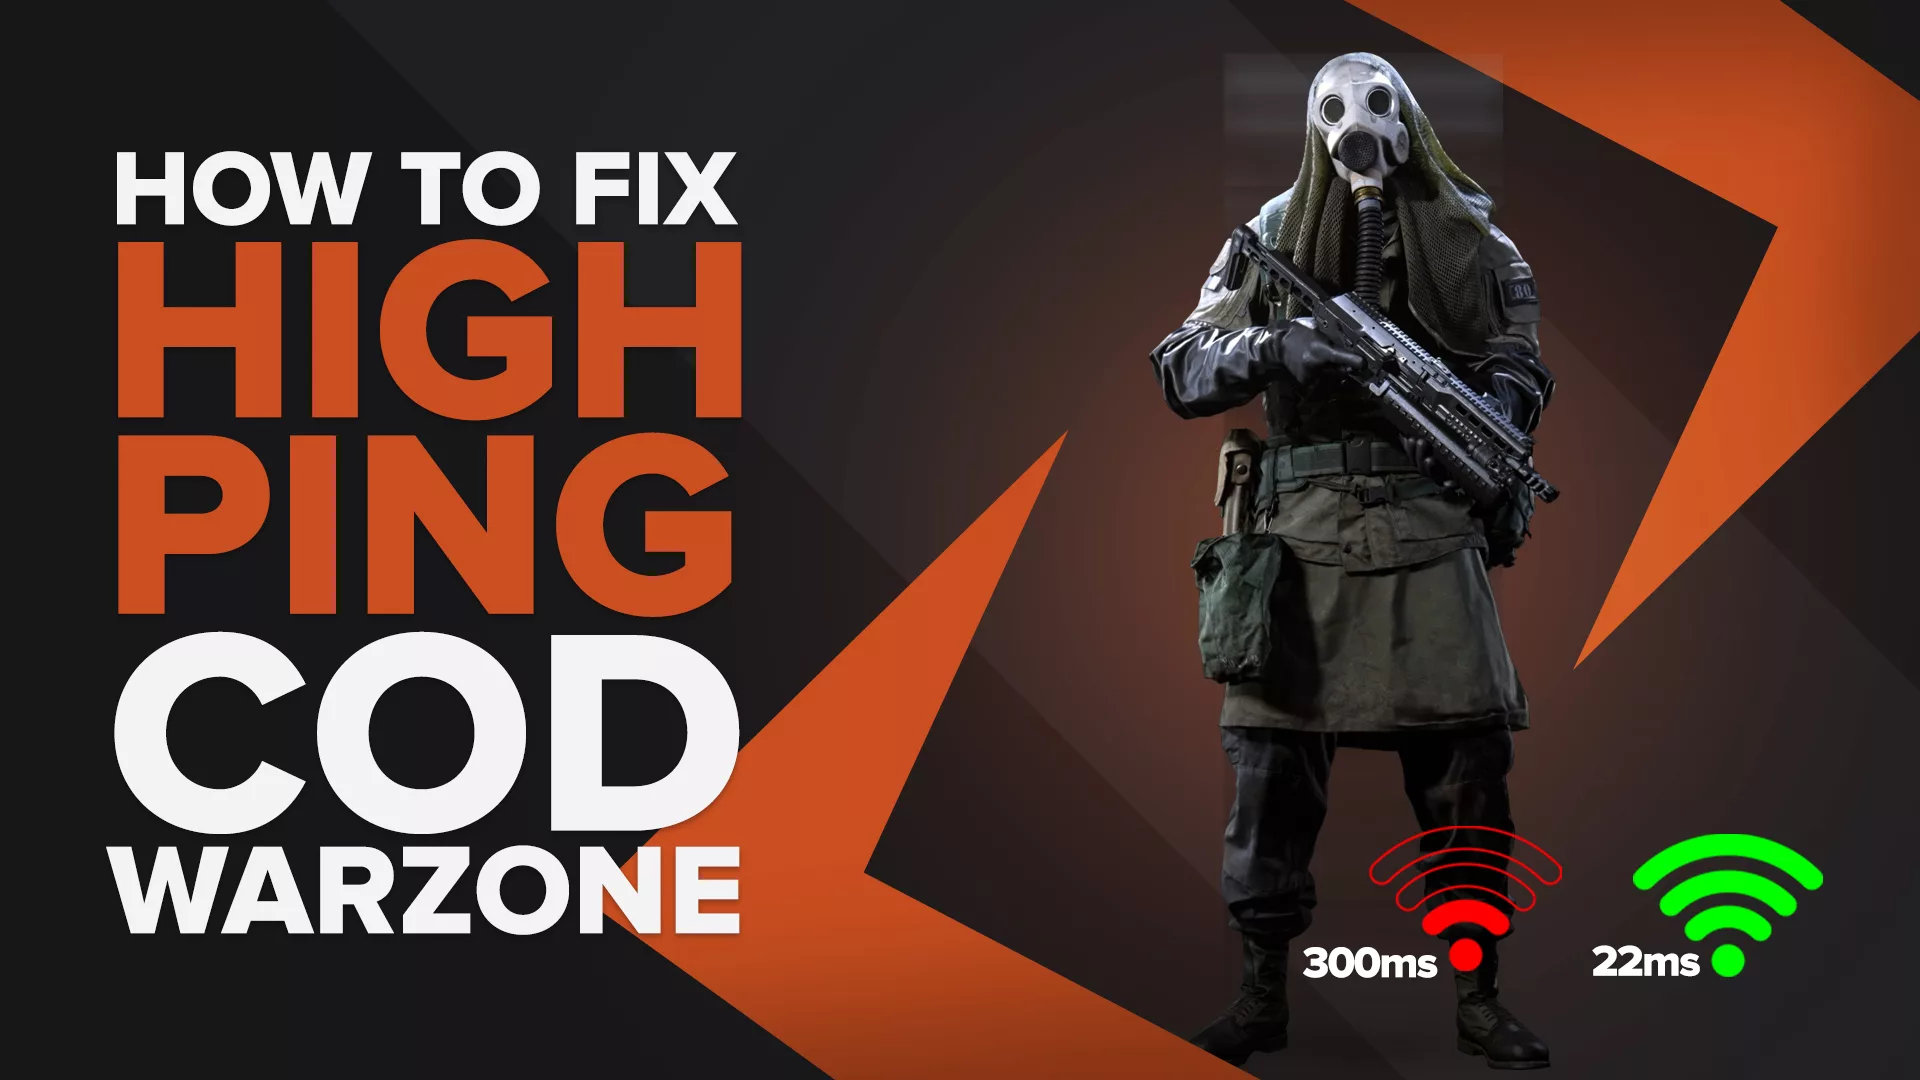 How to fix your High Ping in Call of Duty Warzone in a few clicks